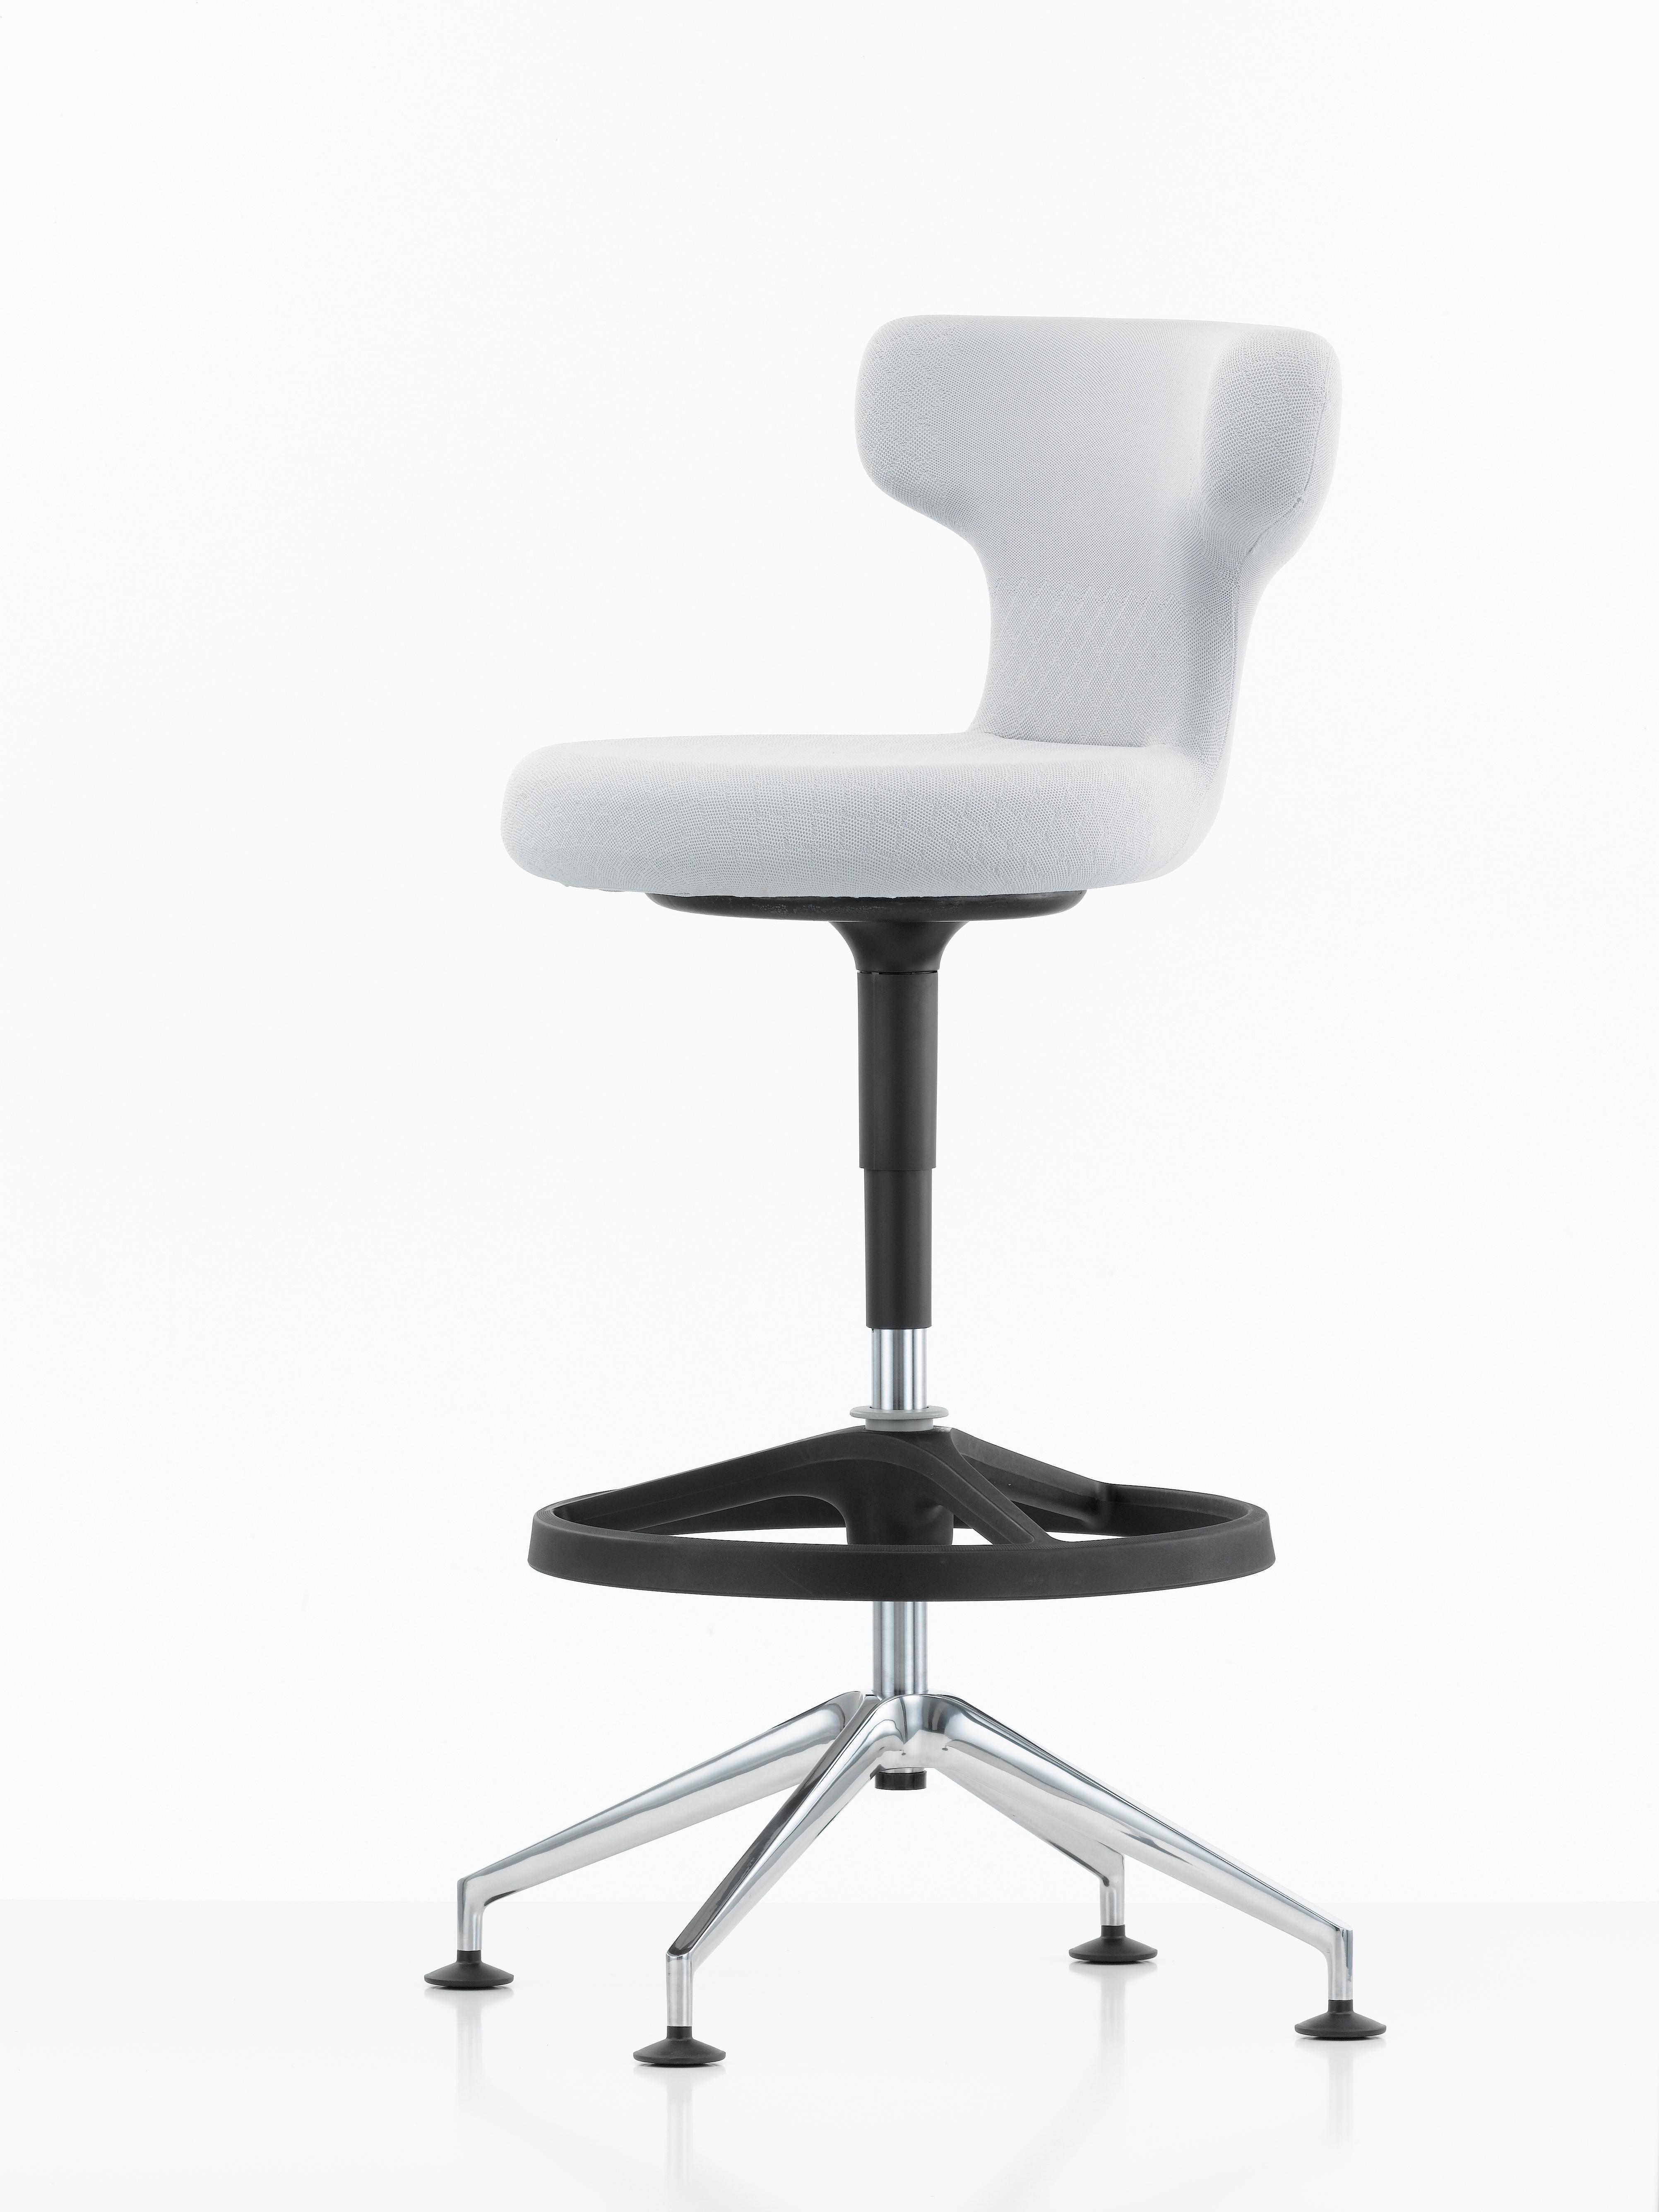 These items are currently only available in the United States.

The Pivot counter stool by Antonio Citterio is an unobtrusive office chair, whose curved contours offer comfortably soft seating, ideal for use in home offices. The slender base of the